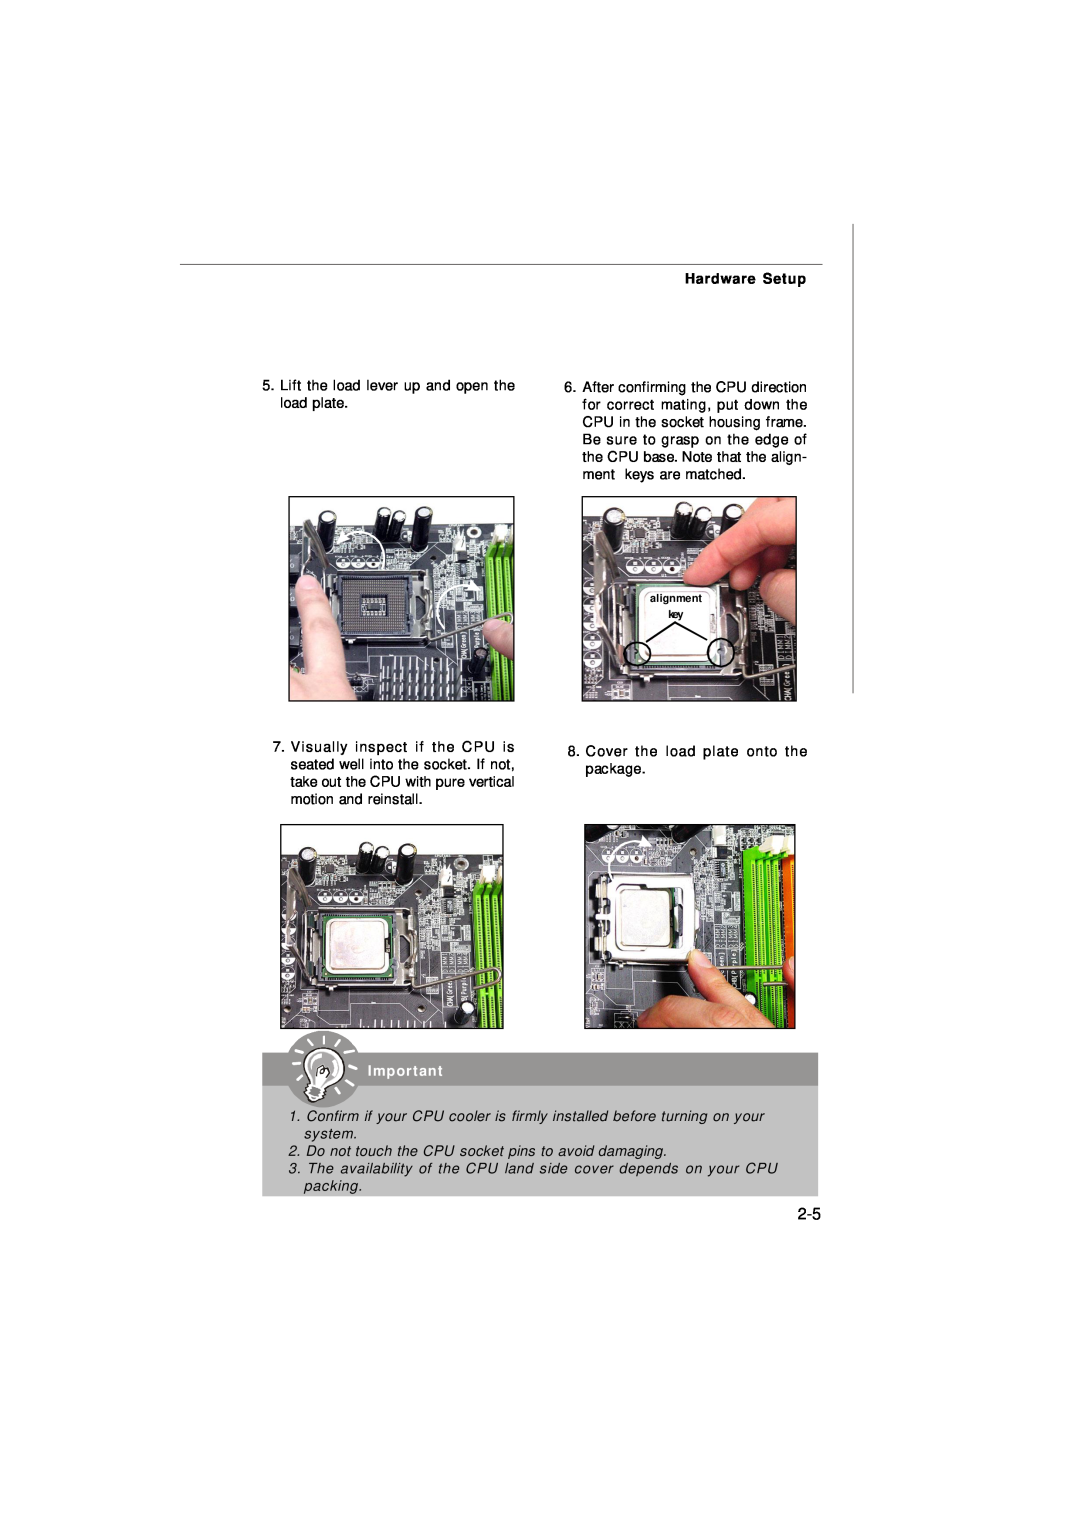 IBM G52-72361X2 manual Do not touch the CPU socket pins to avoid damaging, Lift the load lever up and open the load plate 